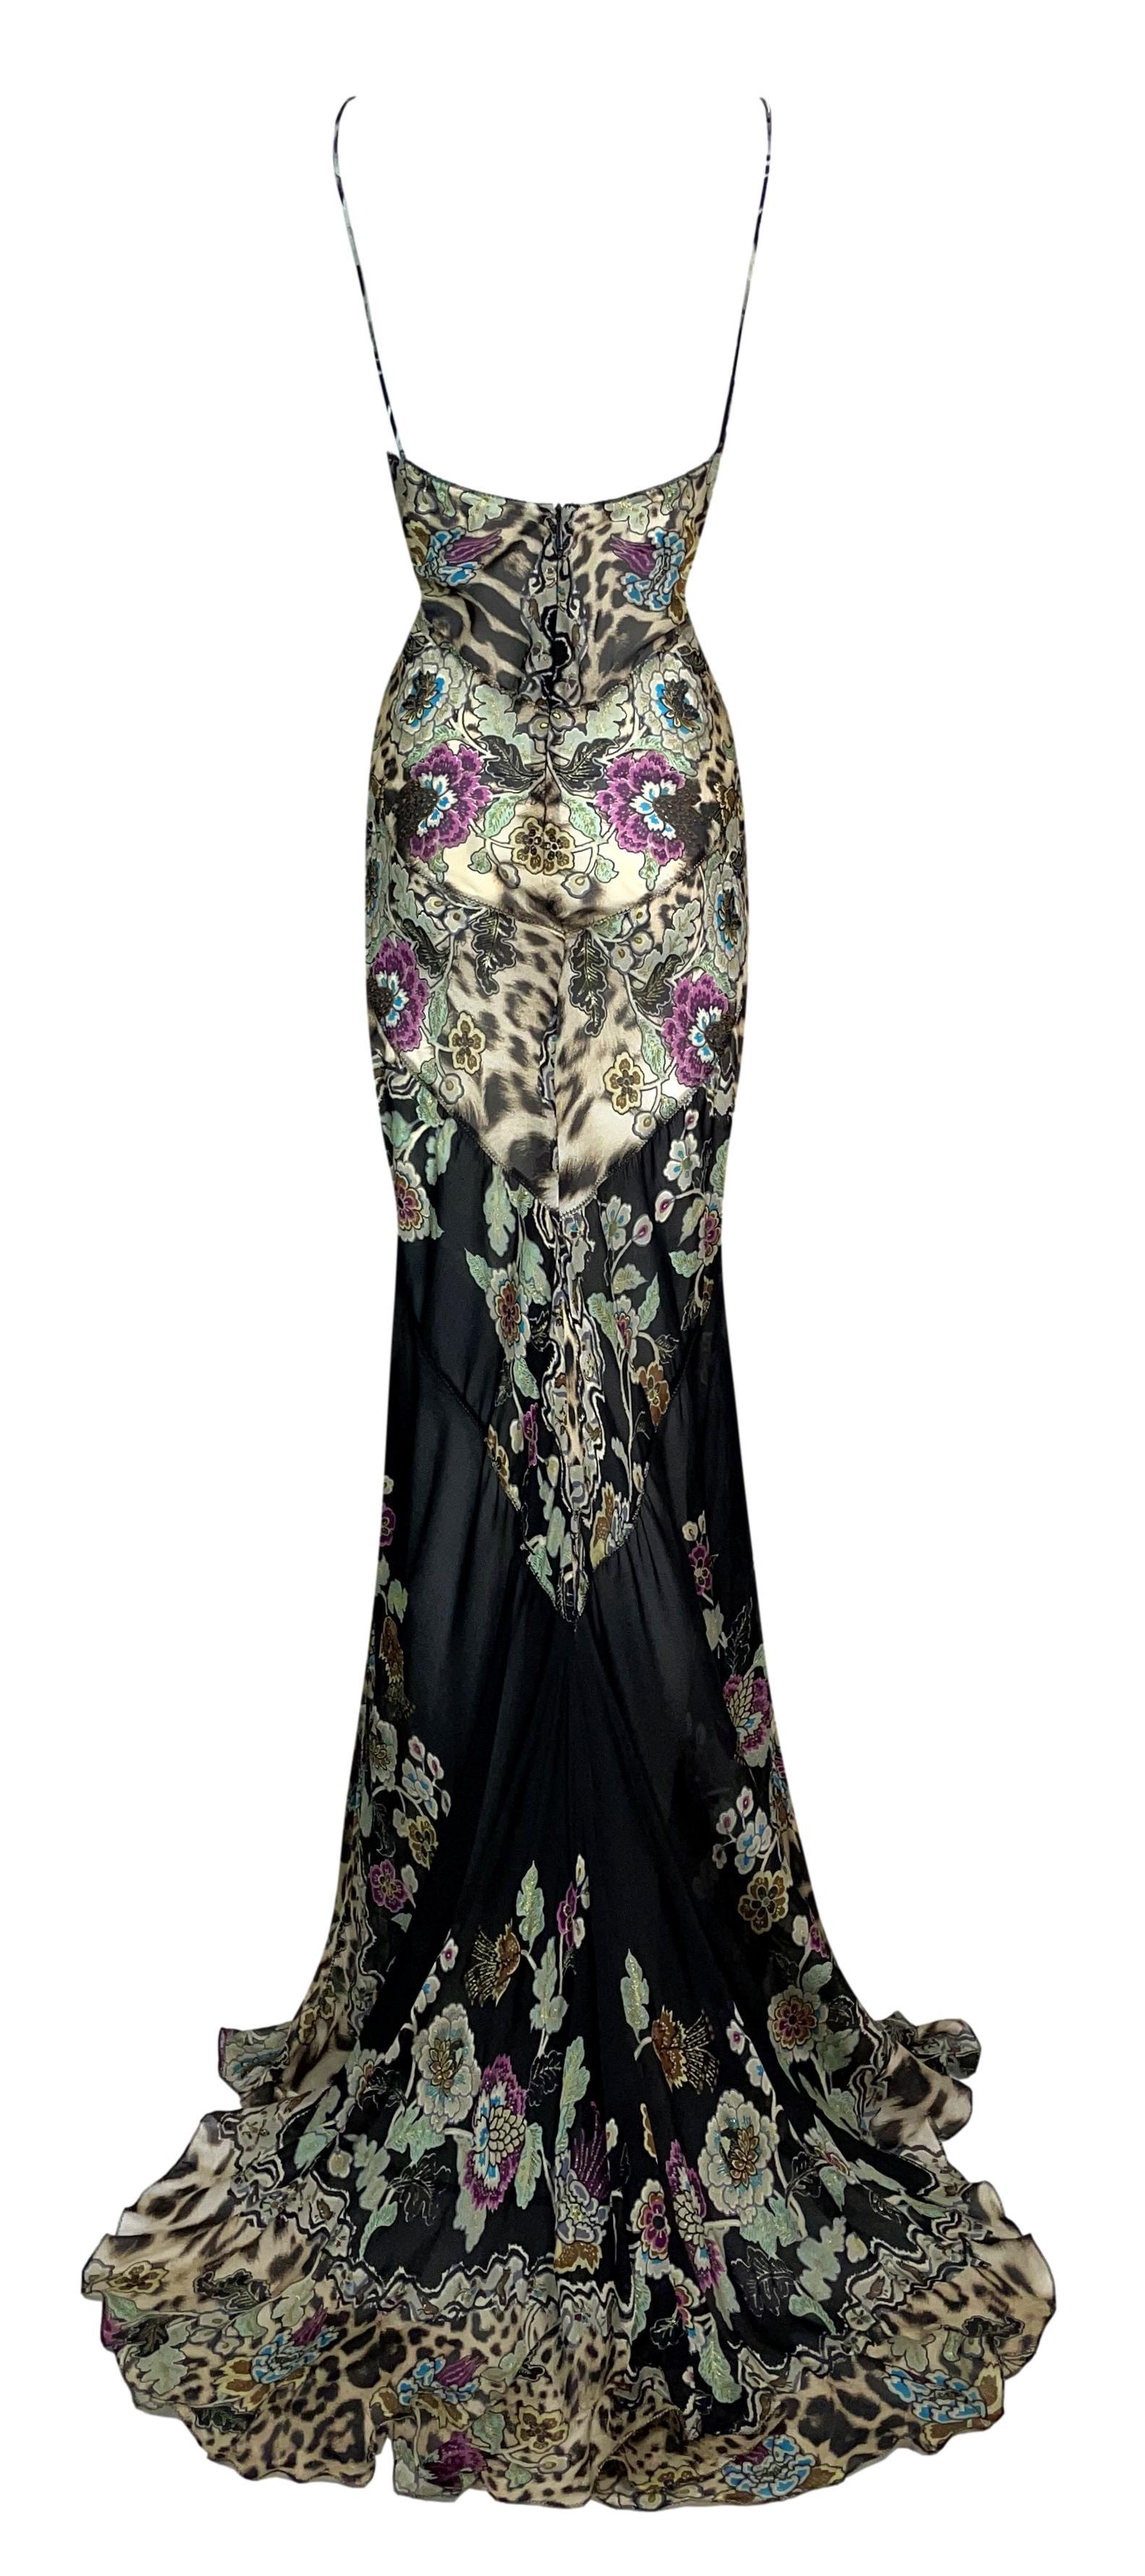 S/S 2003 Roberto Cavalli Chinoiserie Black Silk Extra Long Gown Dress In Excellent Condition For Sale In Yukon, OK